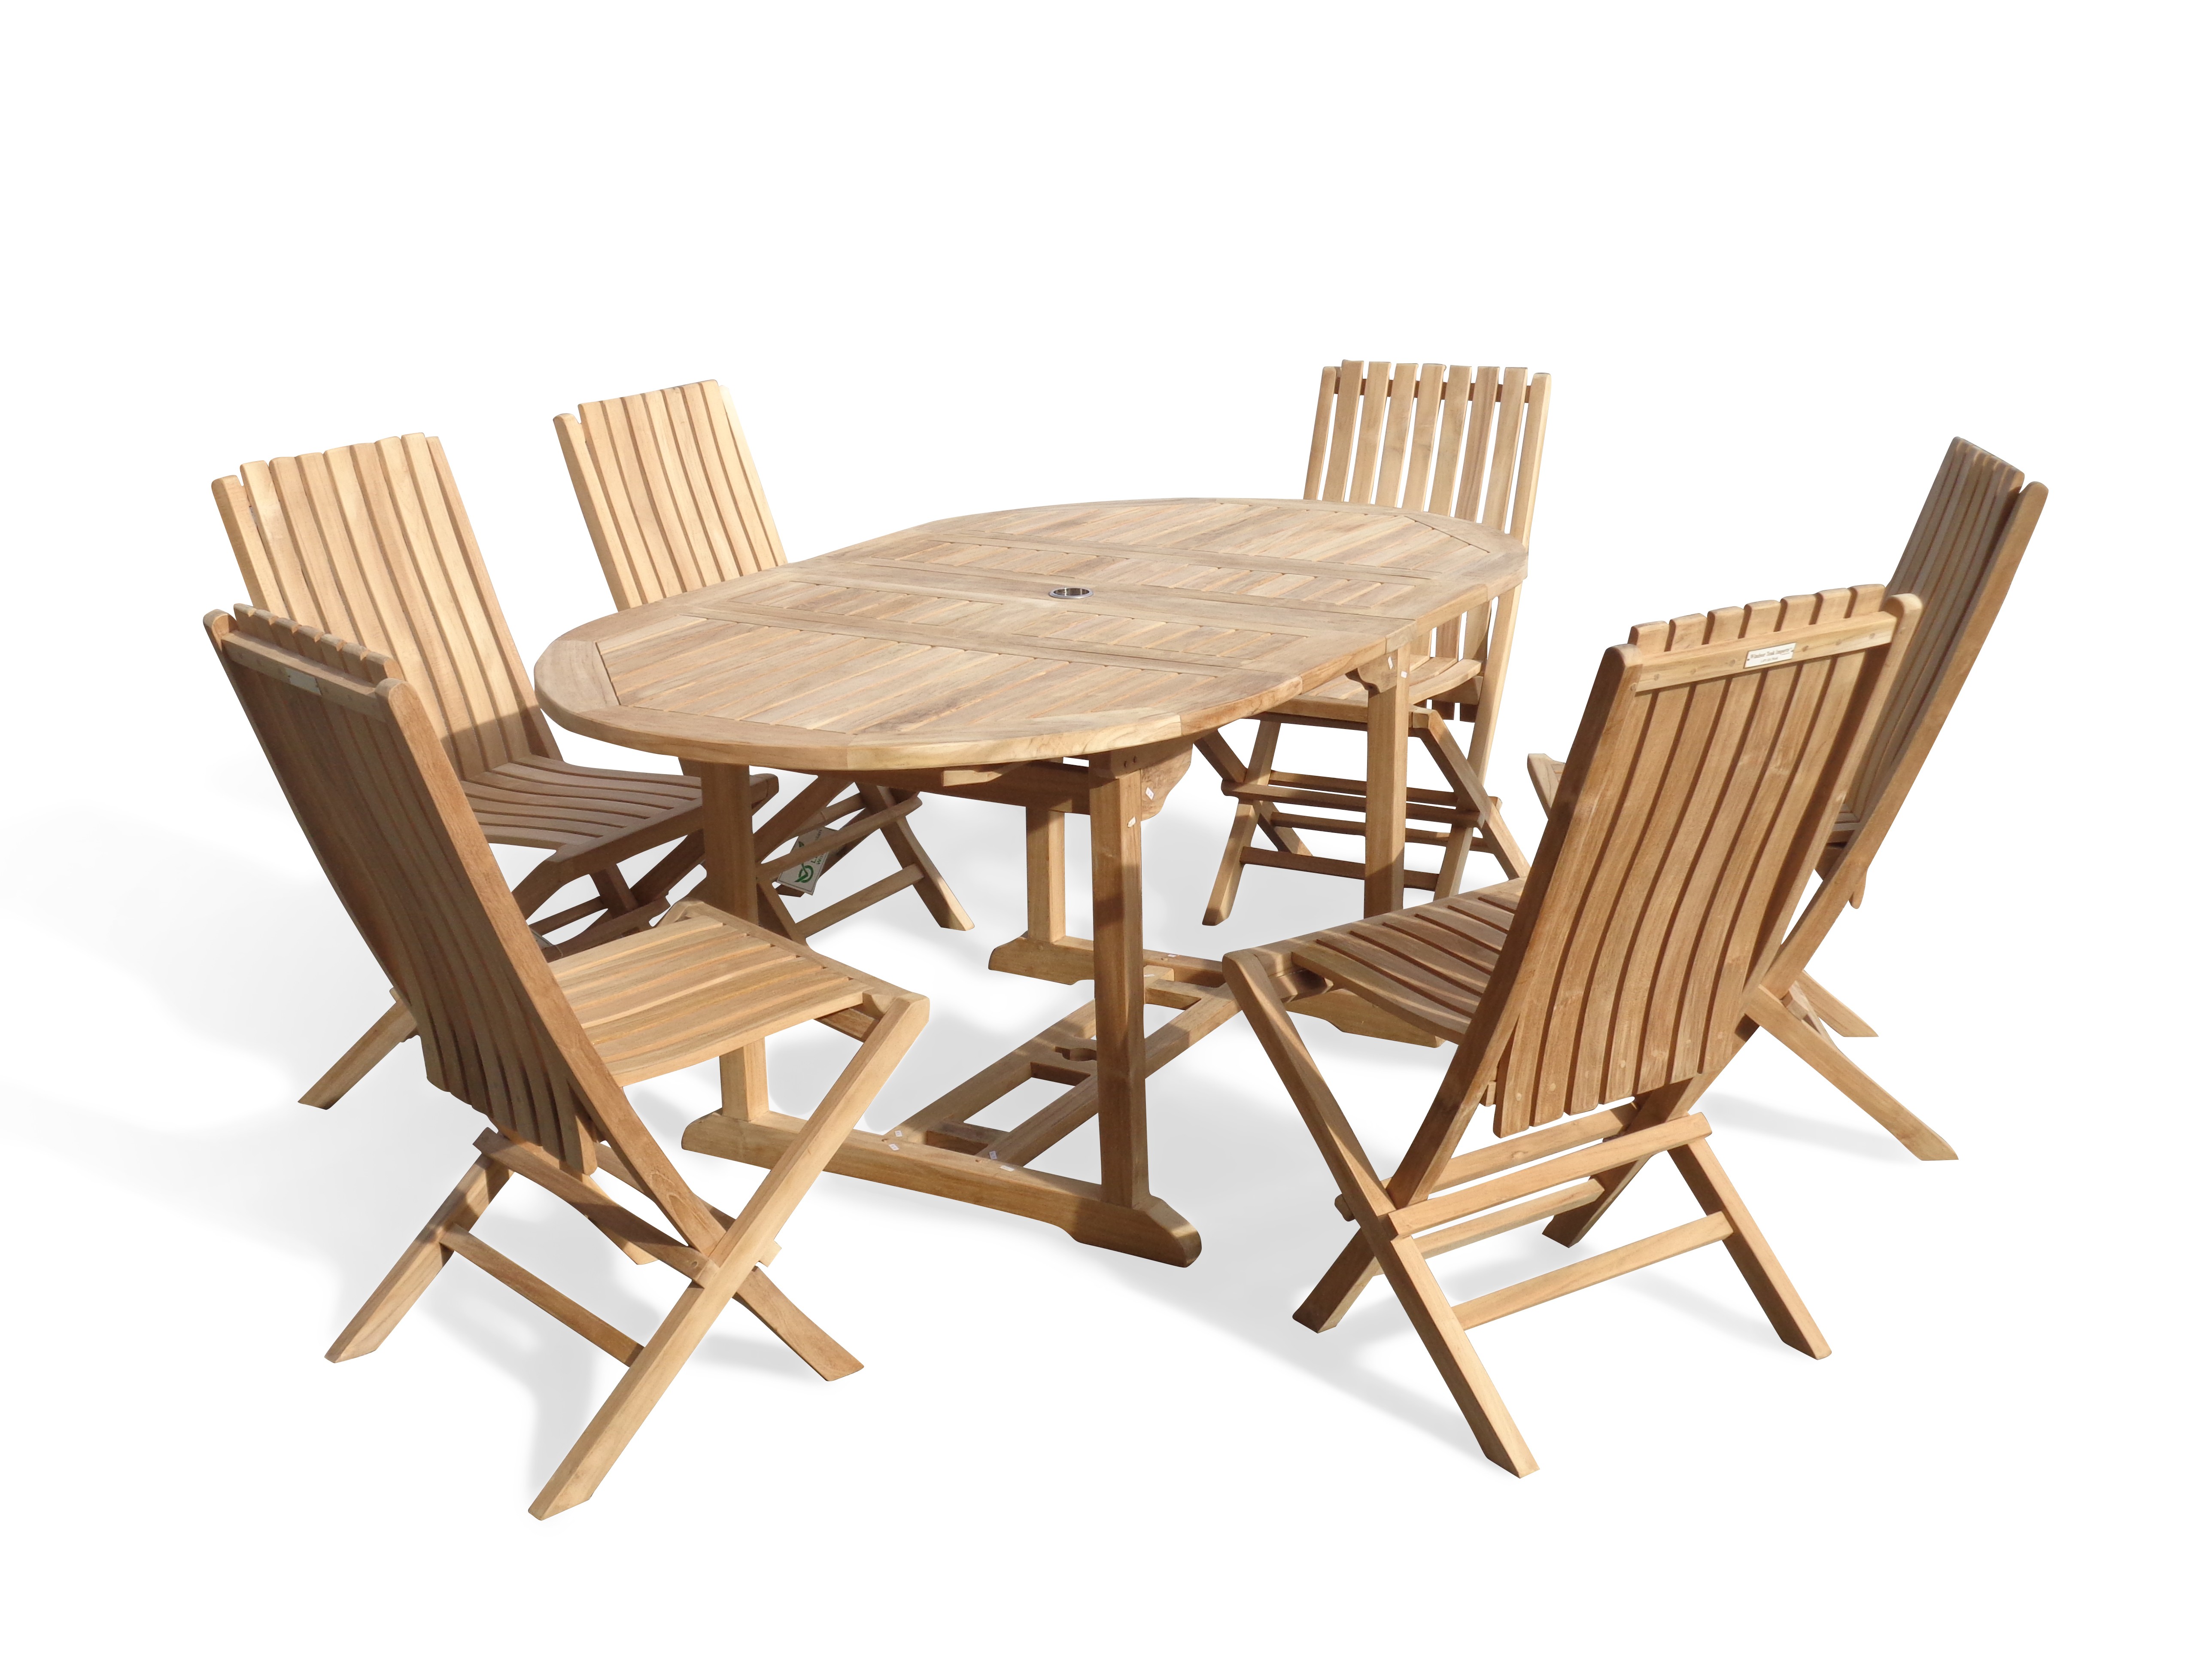 Buckingham 66" x 39" Double Leaf Oval Extension Teak Table W/6 Java Folding Chairs w/ Lumbar Support .